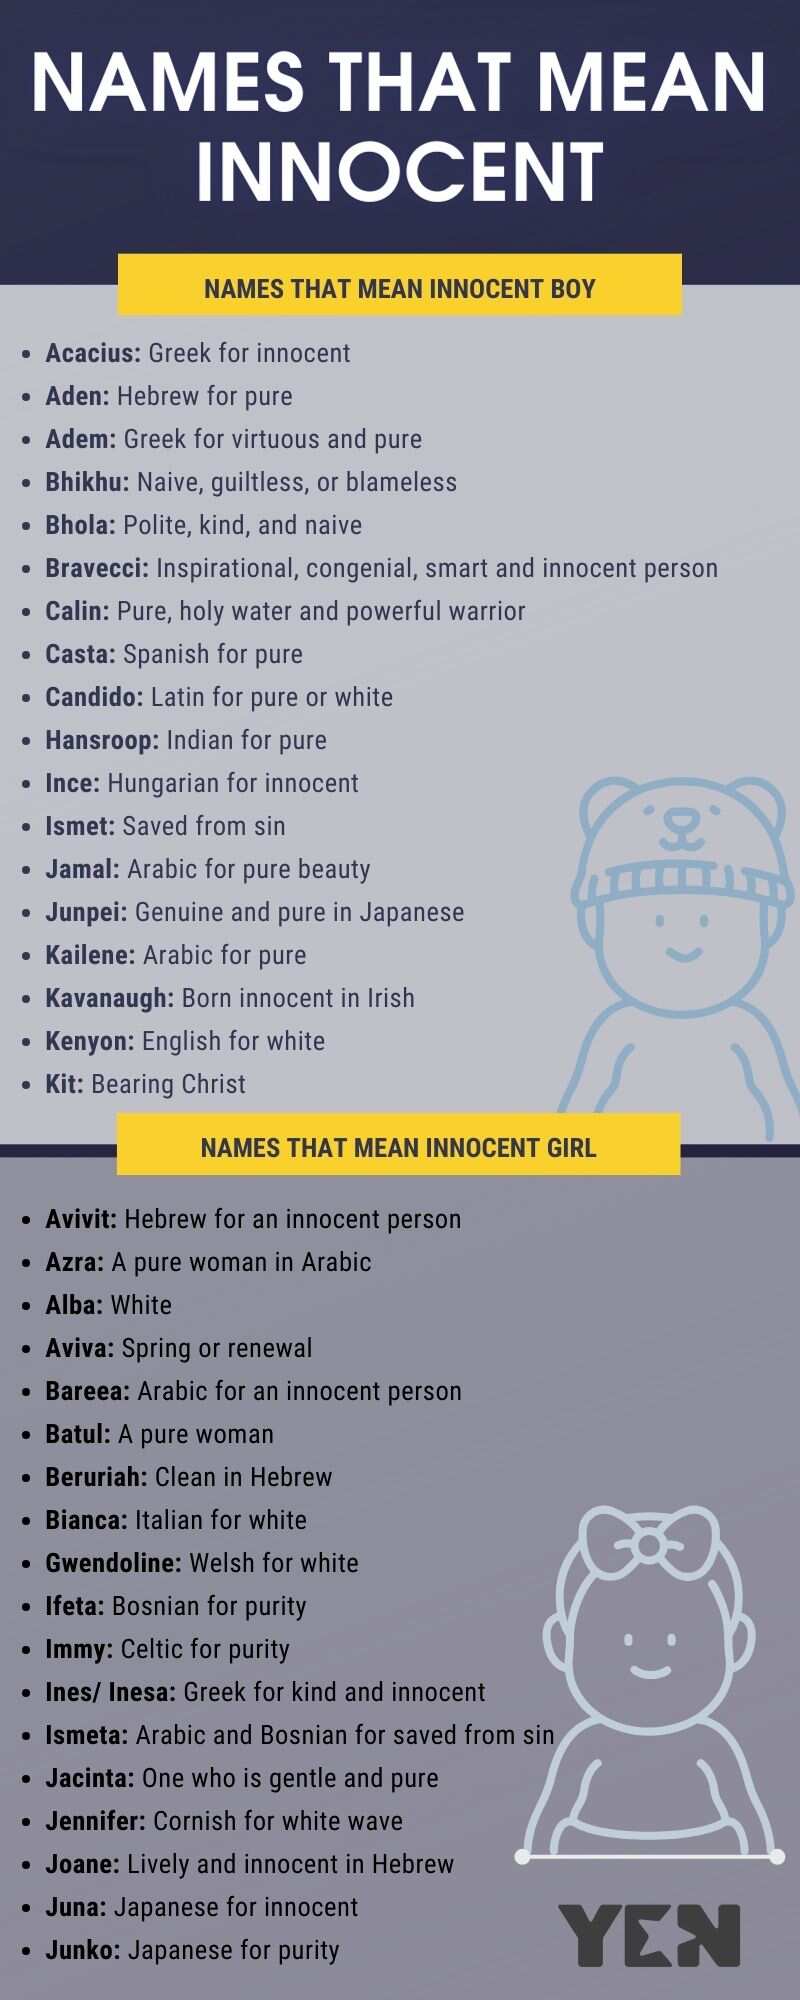 Names that mean innocent